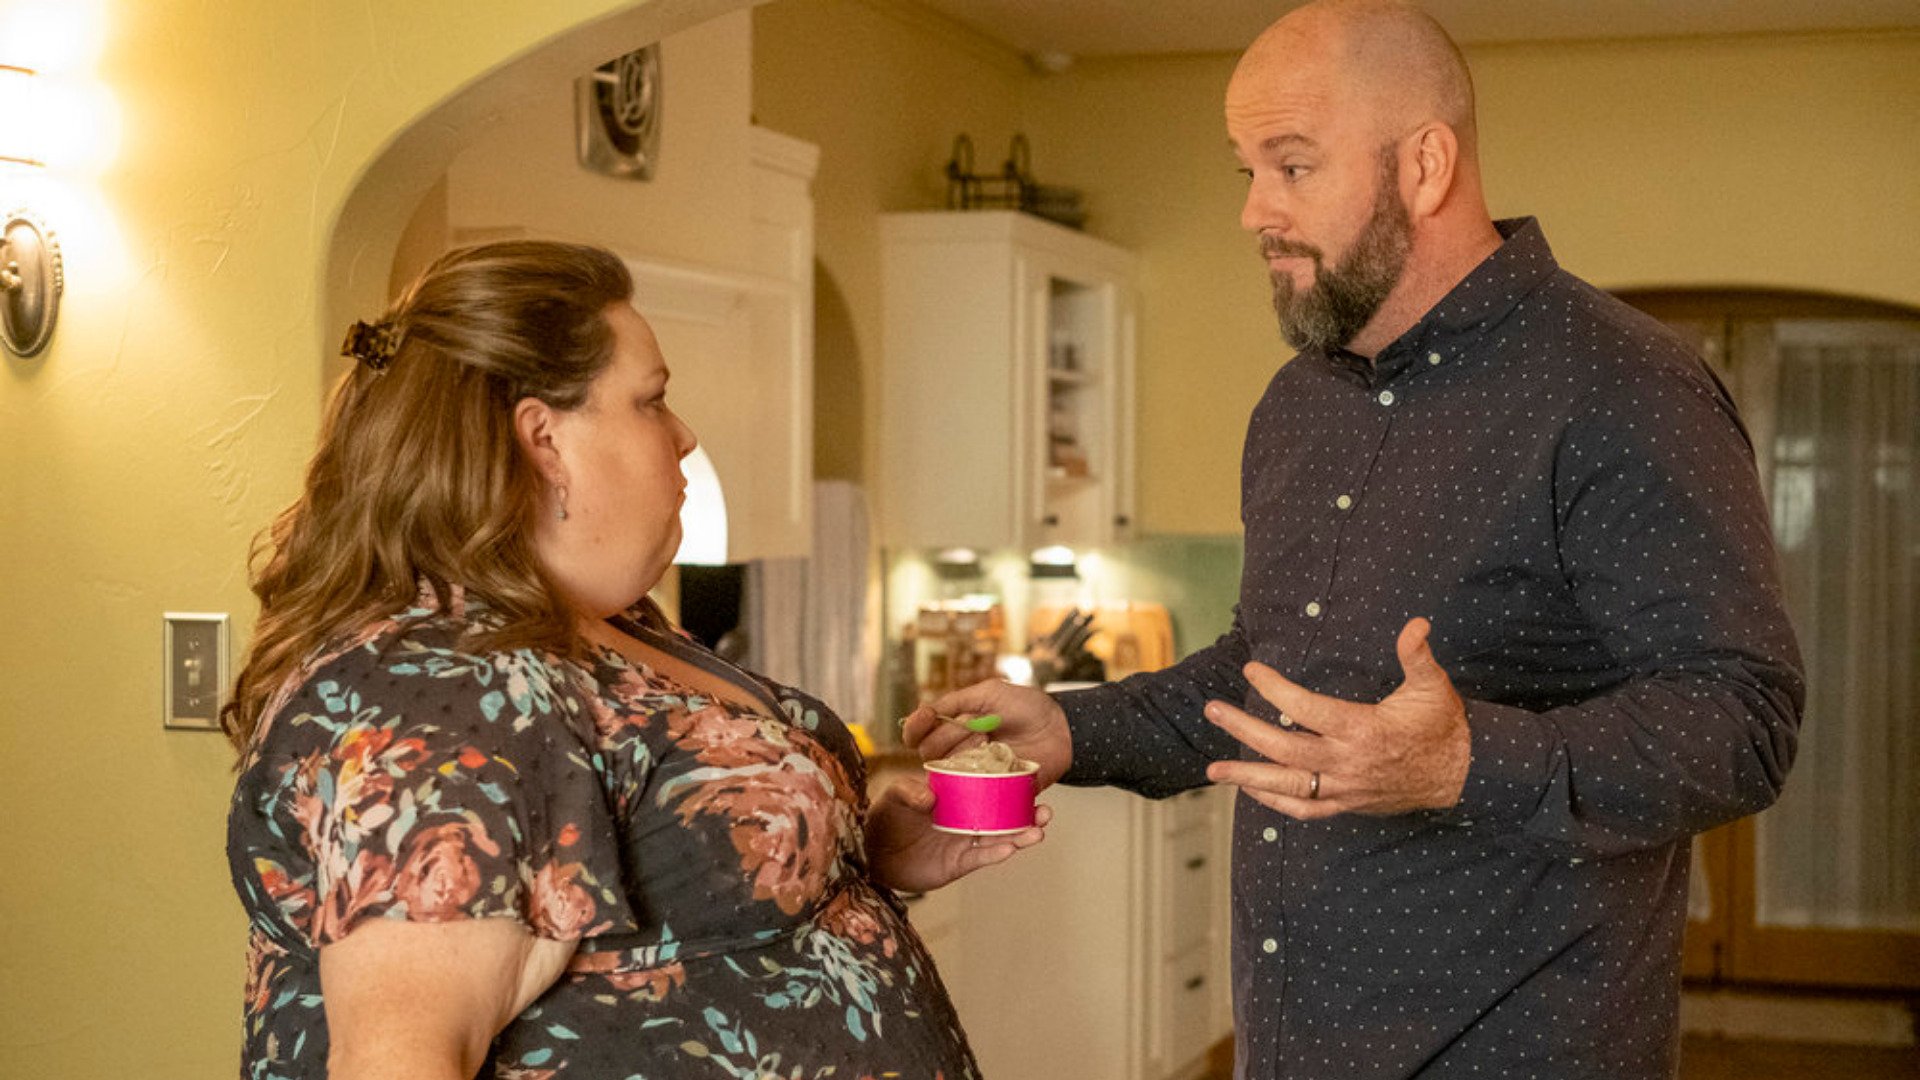 ‘This Is Us’ Season 6 Episode 3 Recap, ‘Four Fathers’ Gives Fans a New ‘Slow Cooker’ to Panic About — What Happened to Kate and Toby?